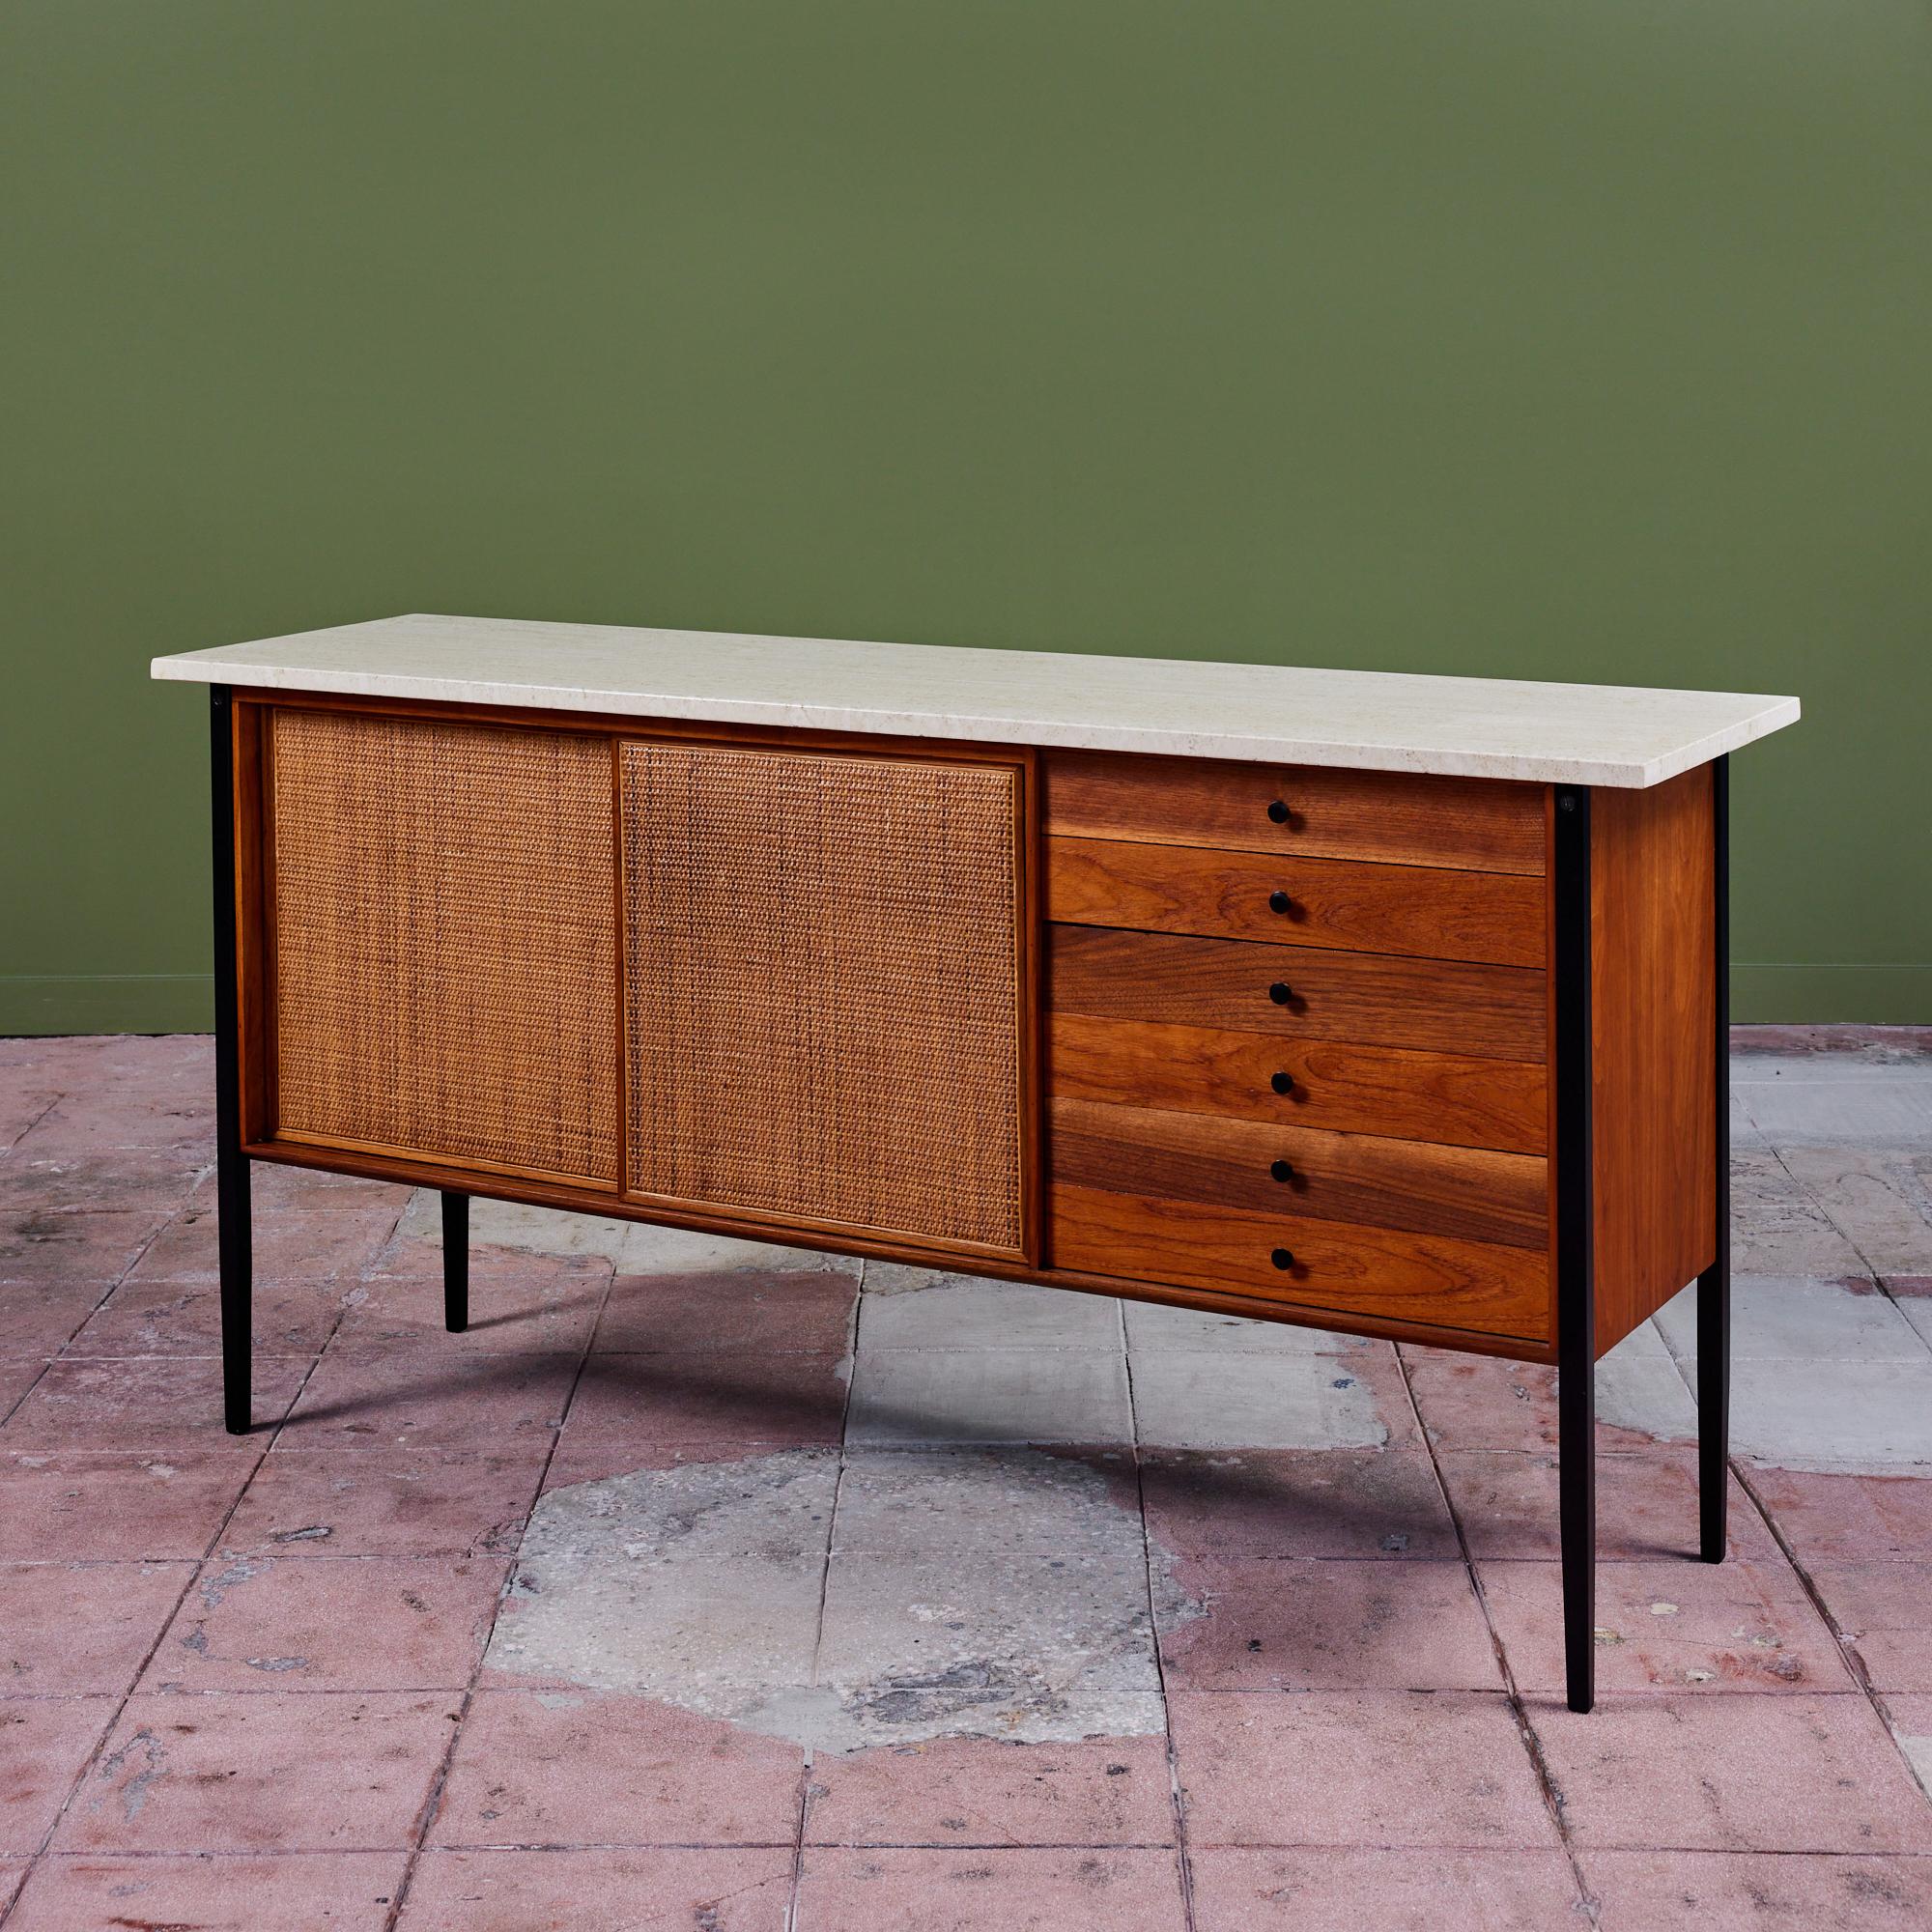 Milo Baughman for Arch Gordon credenza, USA, c.1950s. The cabinet features an oiled walnut frame, painted metal legs and drawer pulls, polished travertine top, and sliding doors with cane panels.

Dimensions
66” width x 18” depth x 33.25”